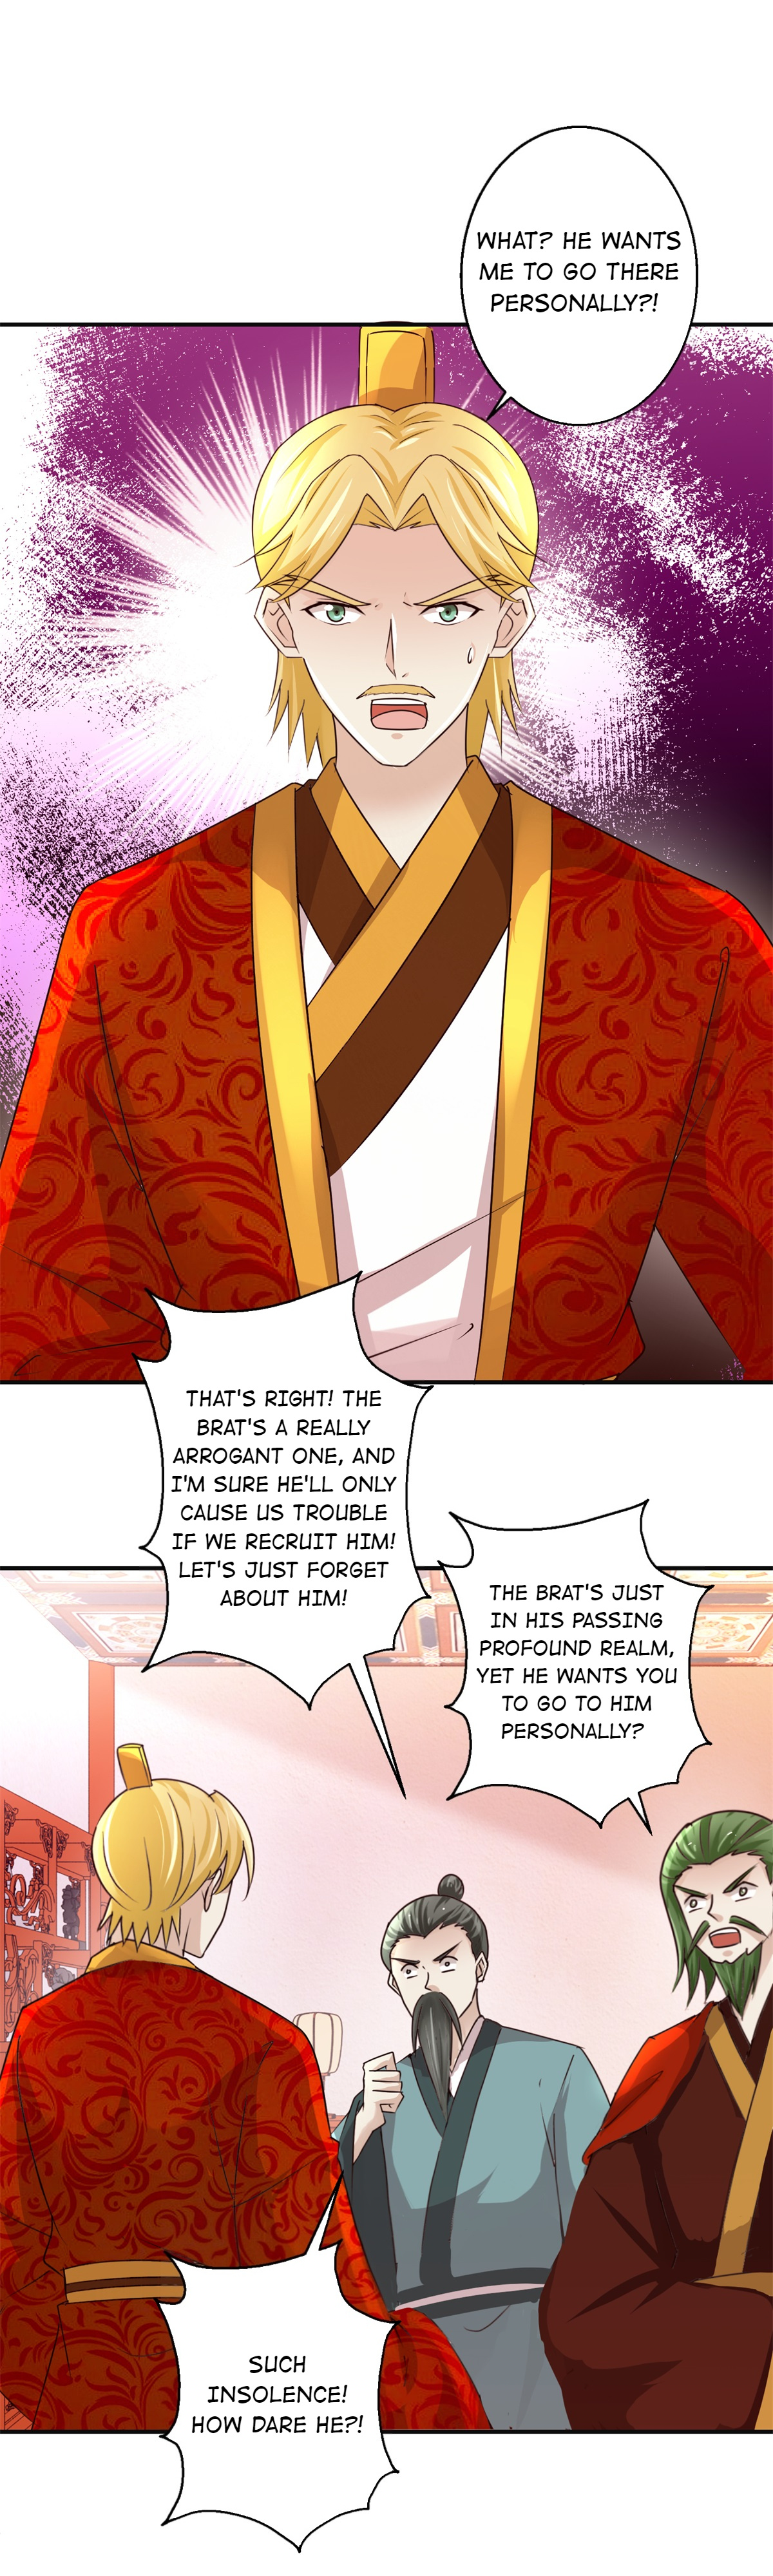 Emperor Of Nine Suns - Page 3